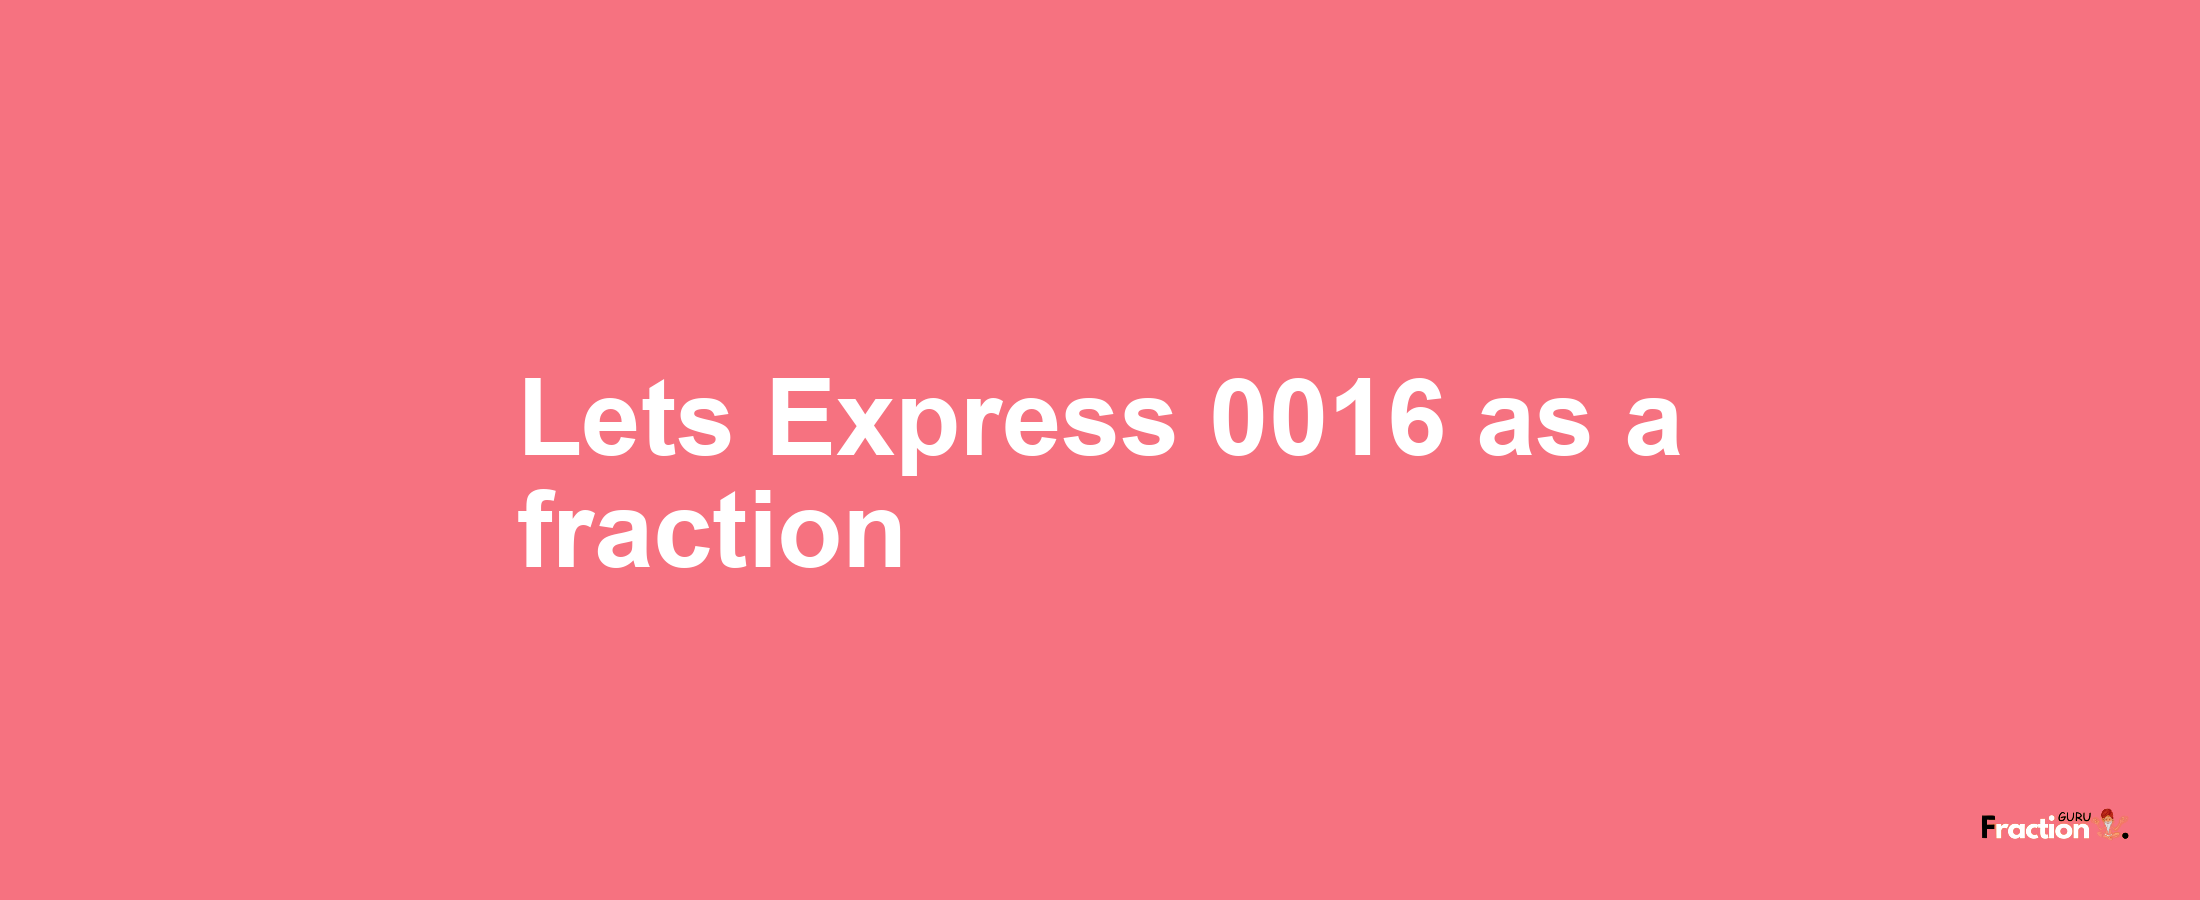 Lets Express 0016 as afraction